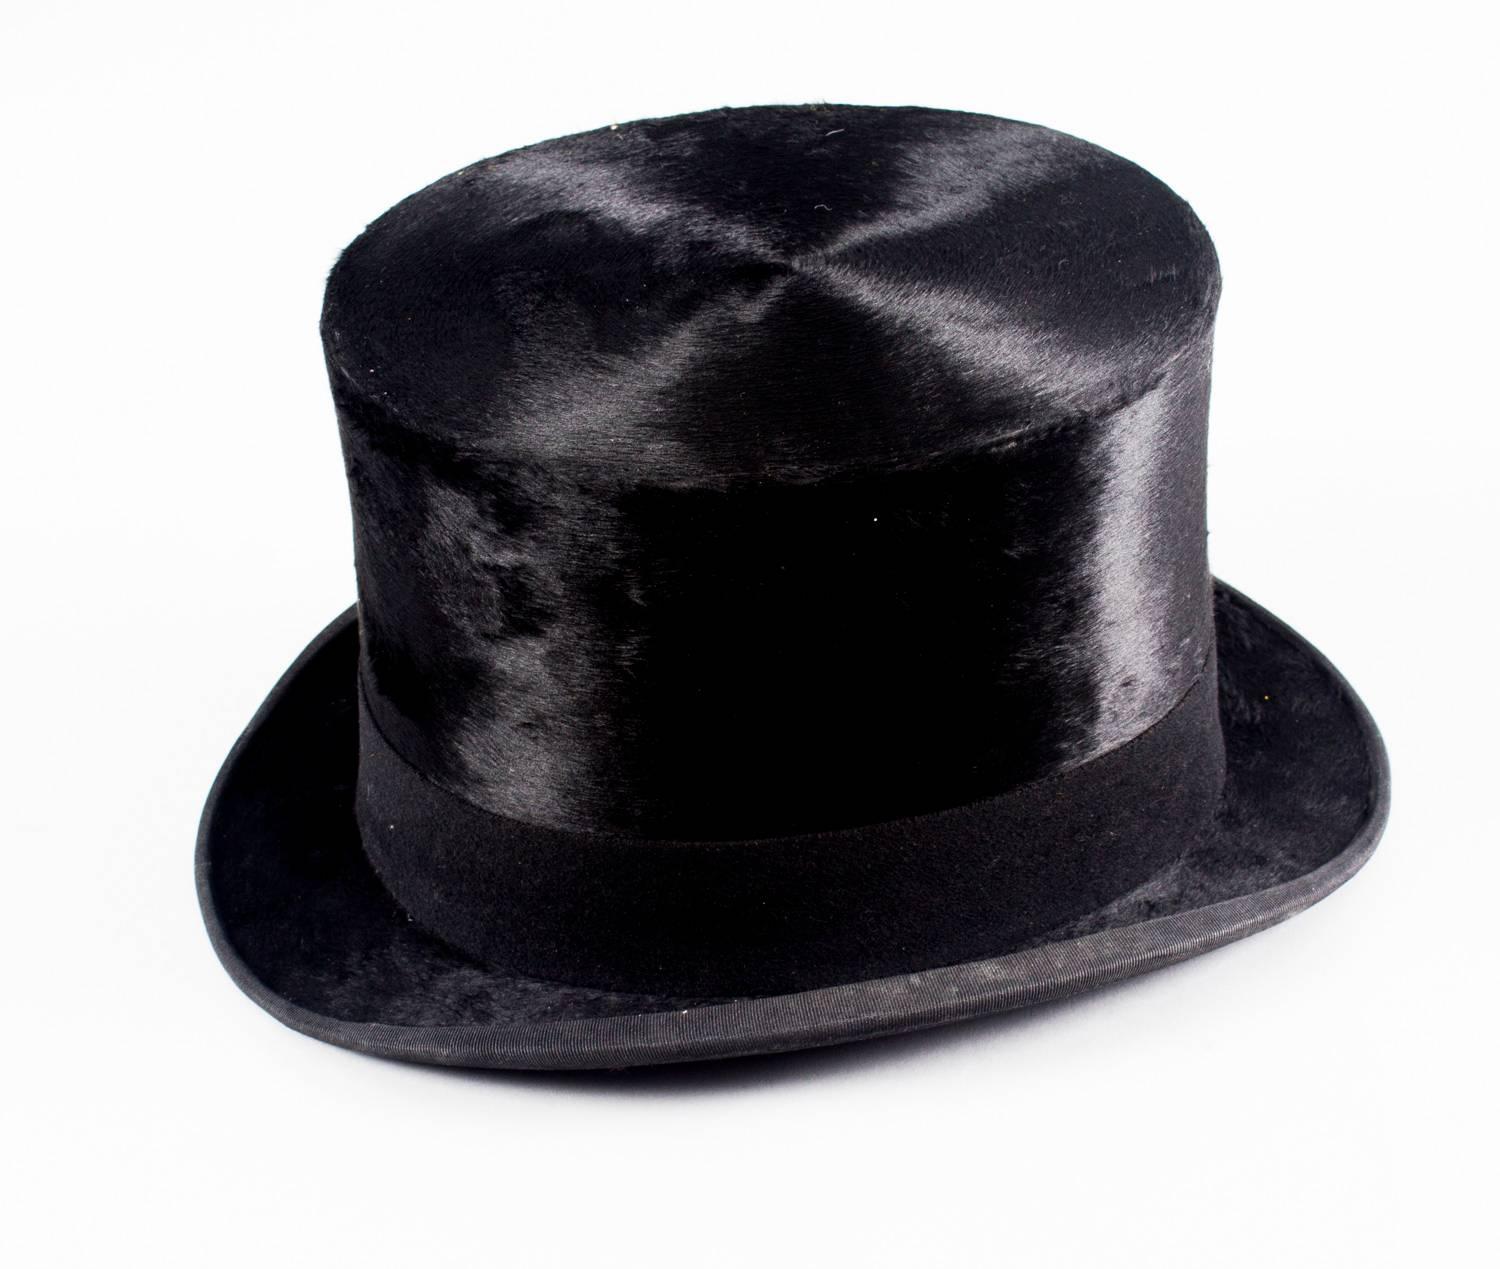 A fabulous Rowe of Bond street, London, black silk top hat, by appointment to Her Majesty Queen Mary, also stamped Christys' London, in a moire silk lined brown leather fitted travelling case, circa 1920 in date.

Christy & Co Ltd has been